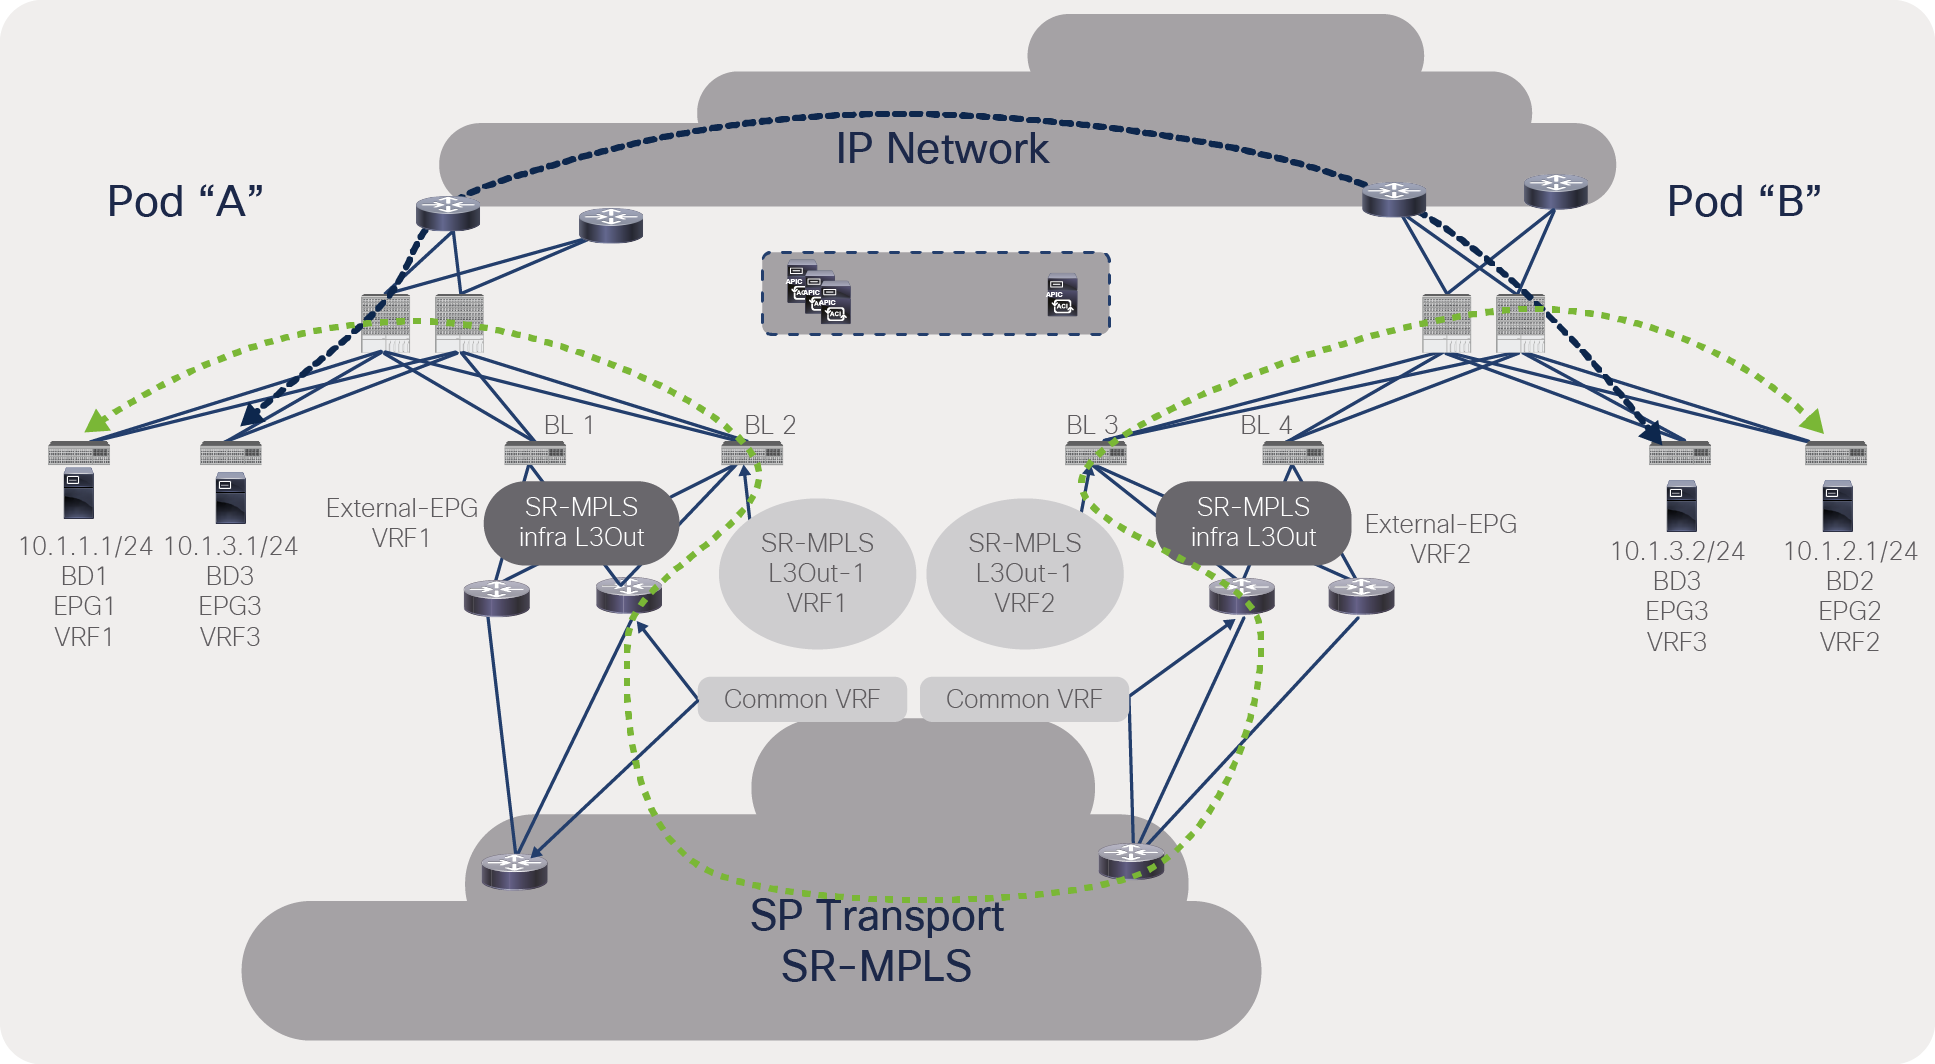 Traffic path selection between IPN and SR/MPLS for a VRF